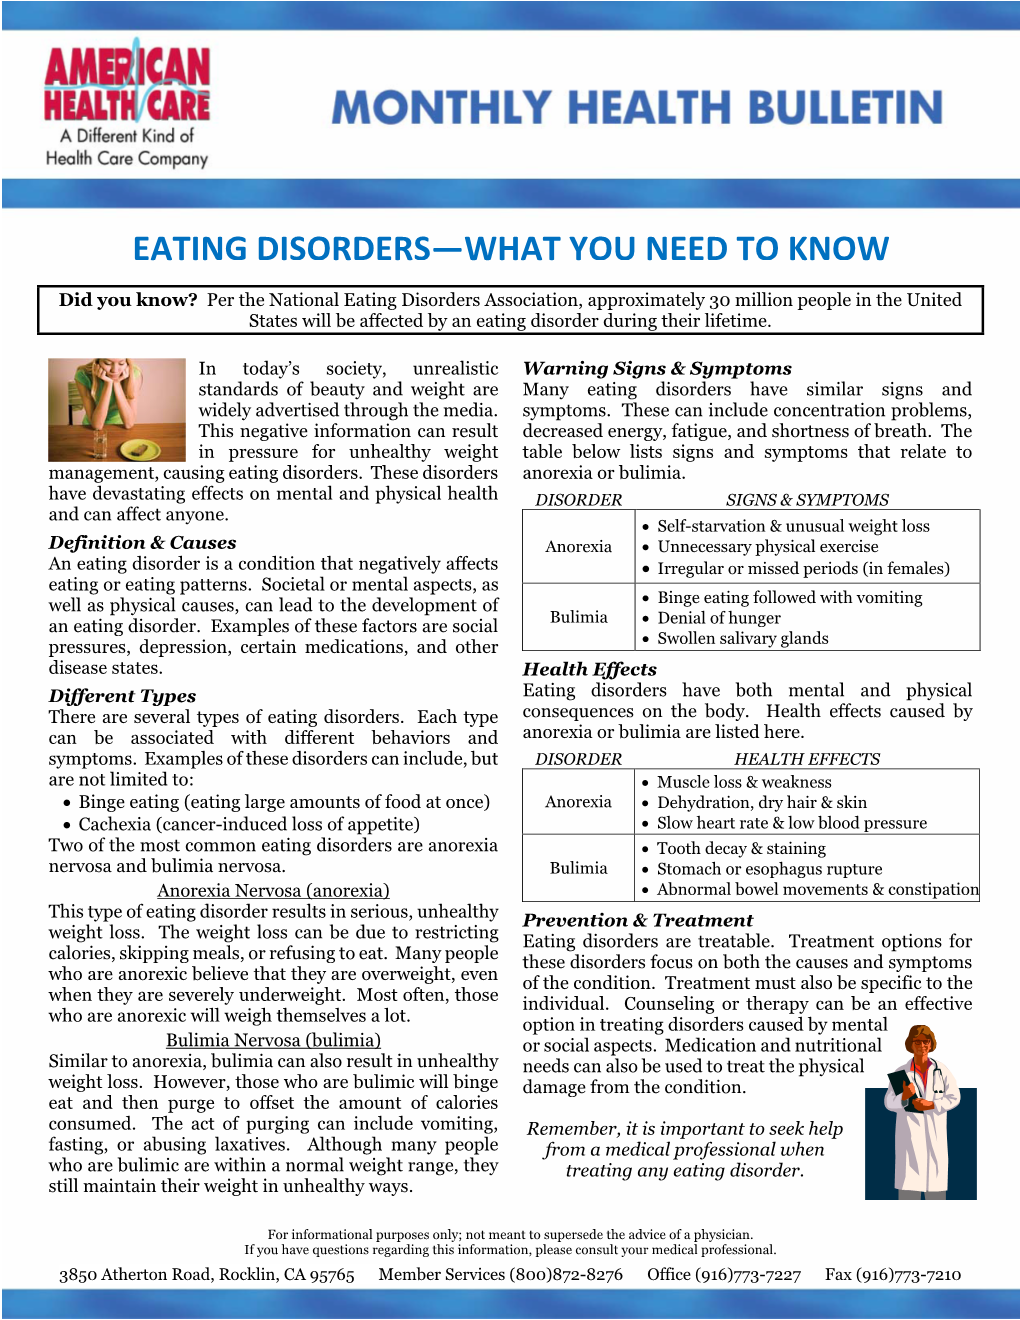 Eating Disorders—What You Need to Know